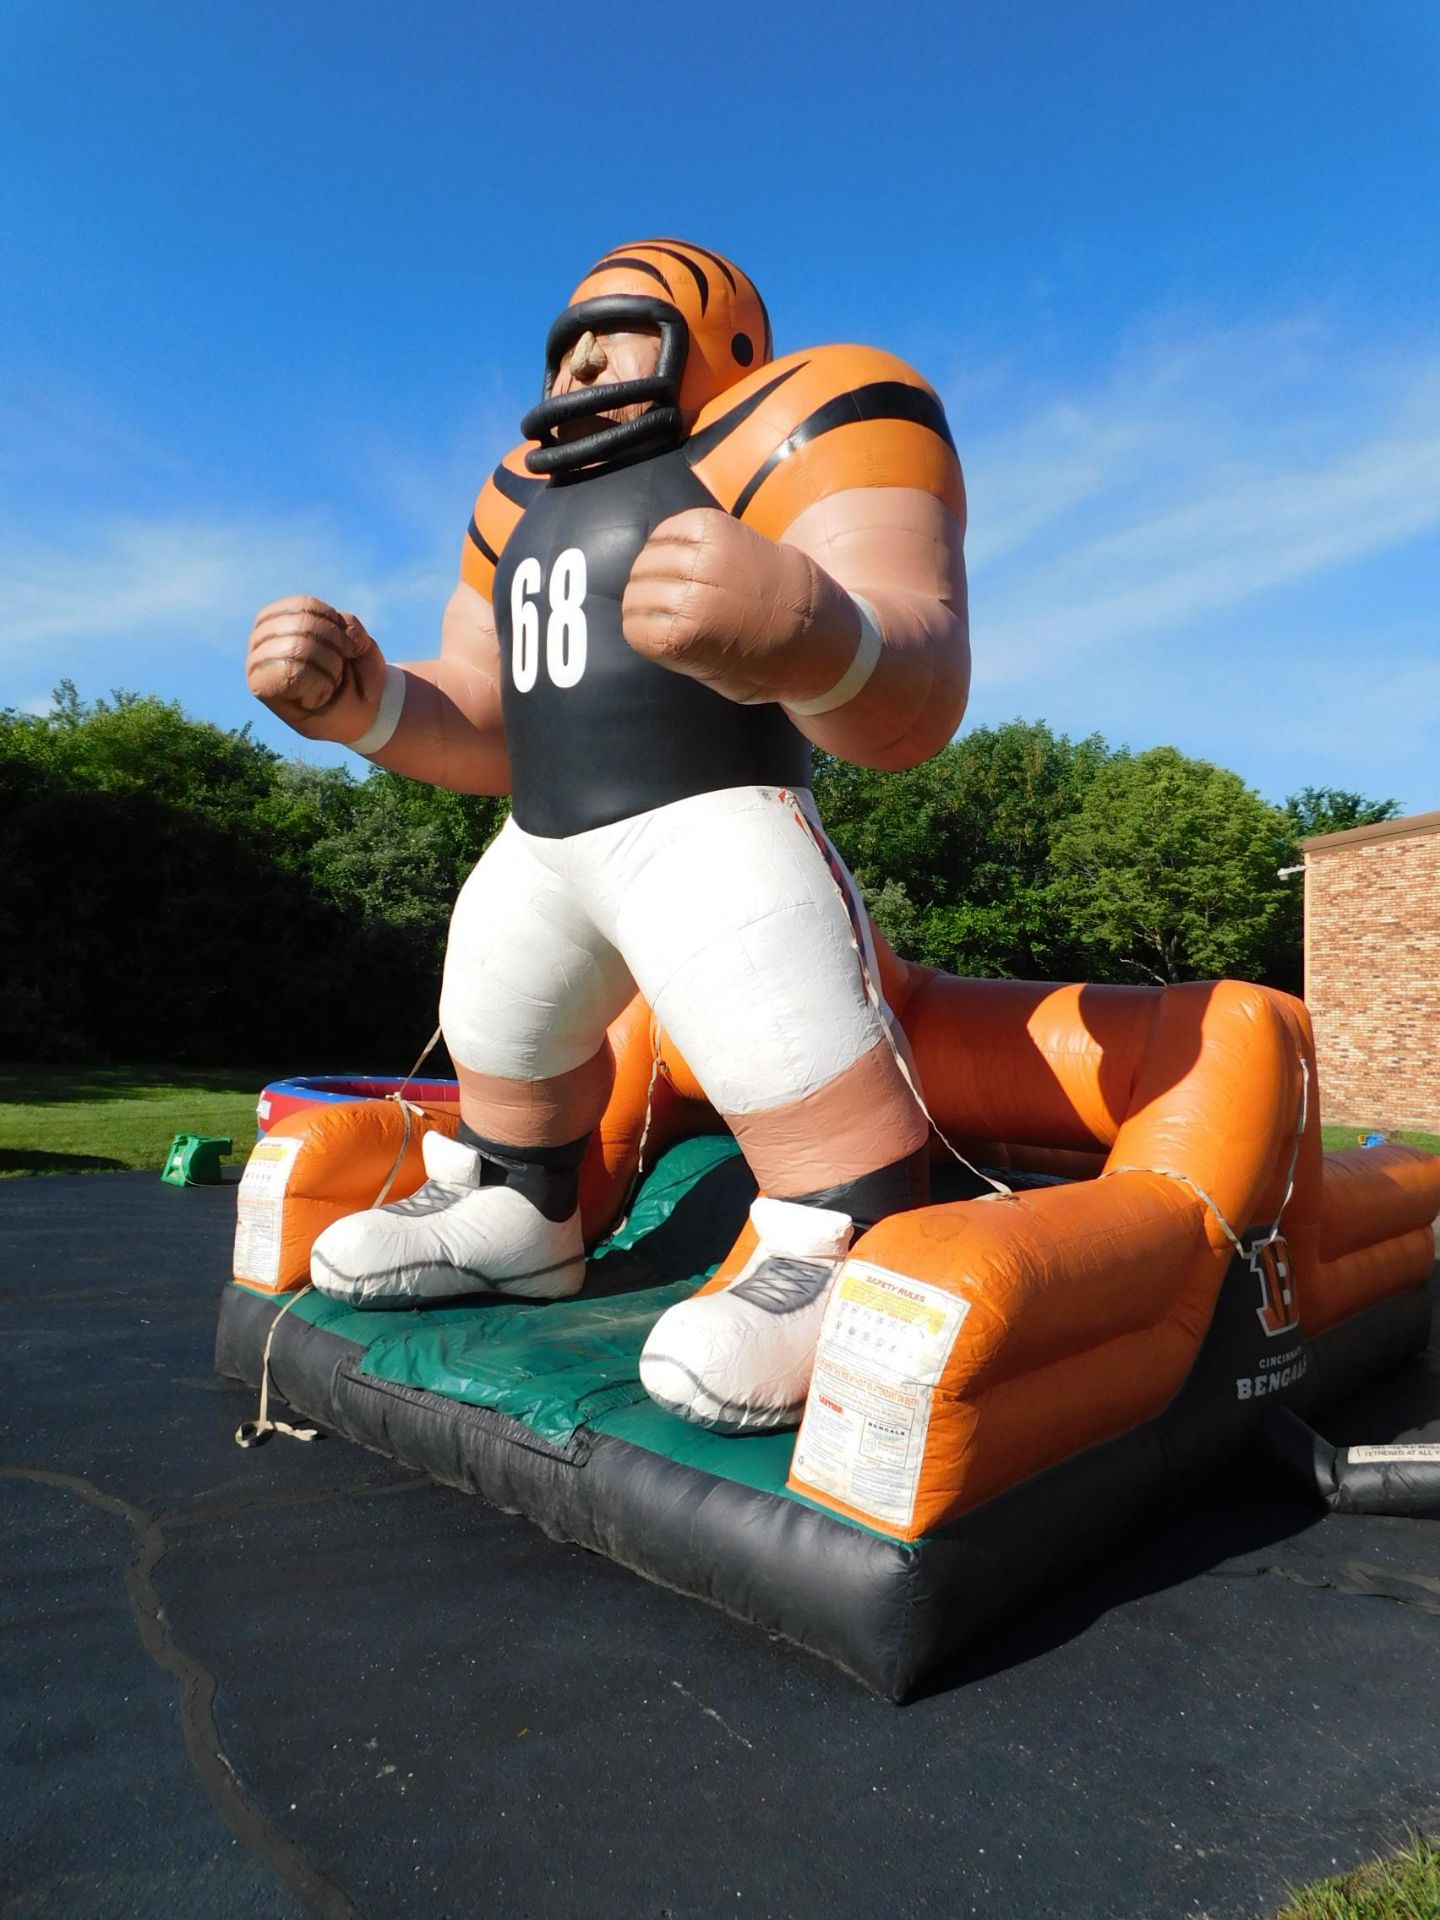 Cincinnati Bengals Obstacle Course, 50'LX13.5'WX16'H, 1 Blower req. #80 - Image 2 of 32